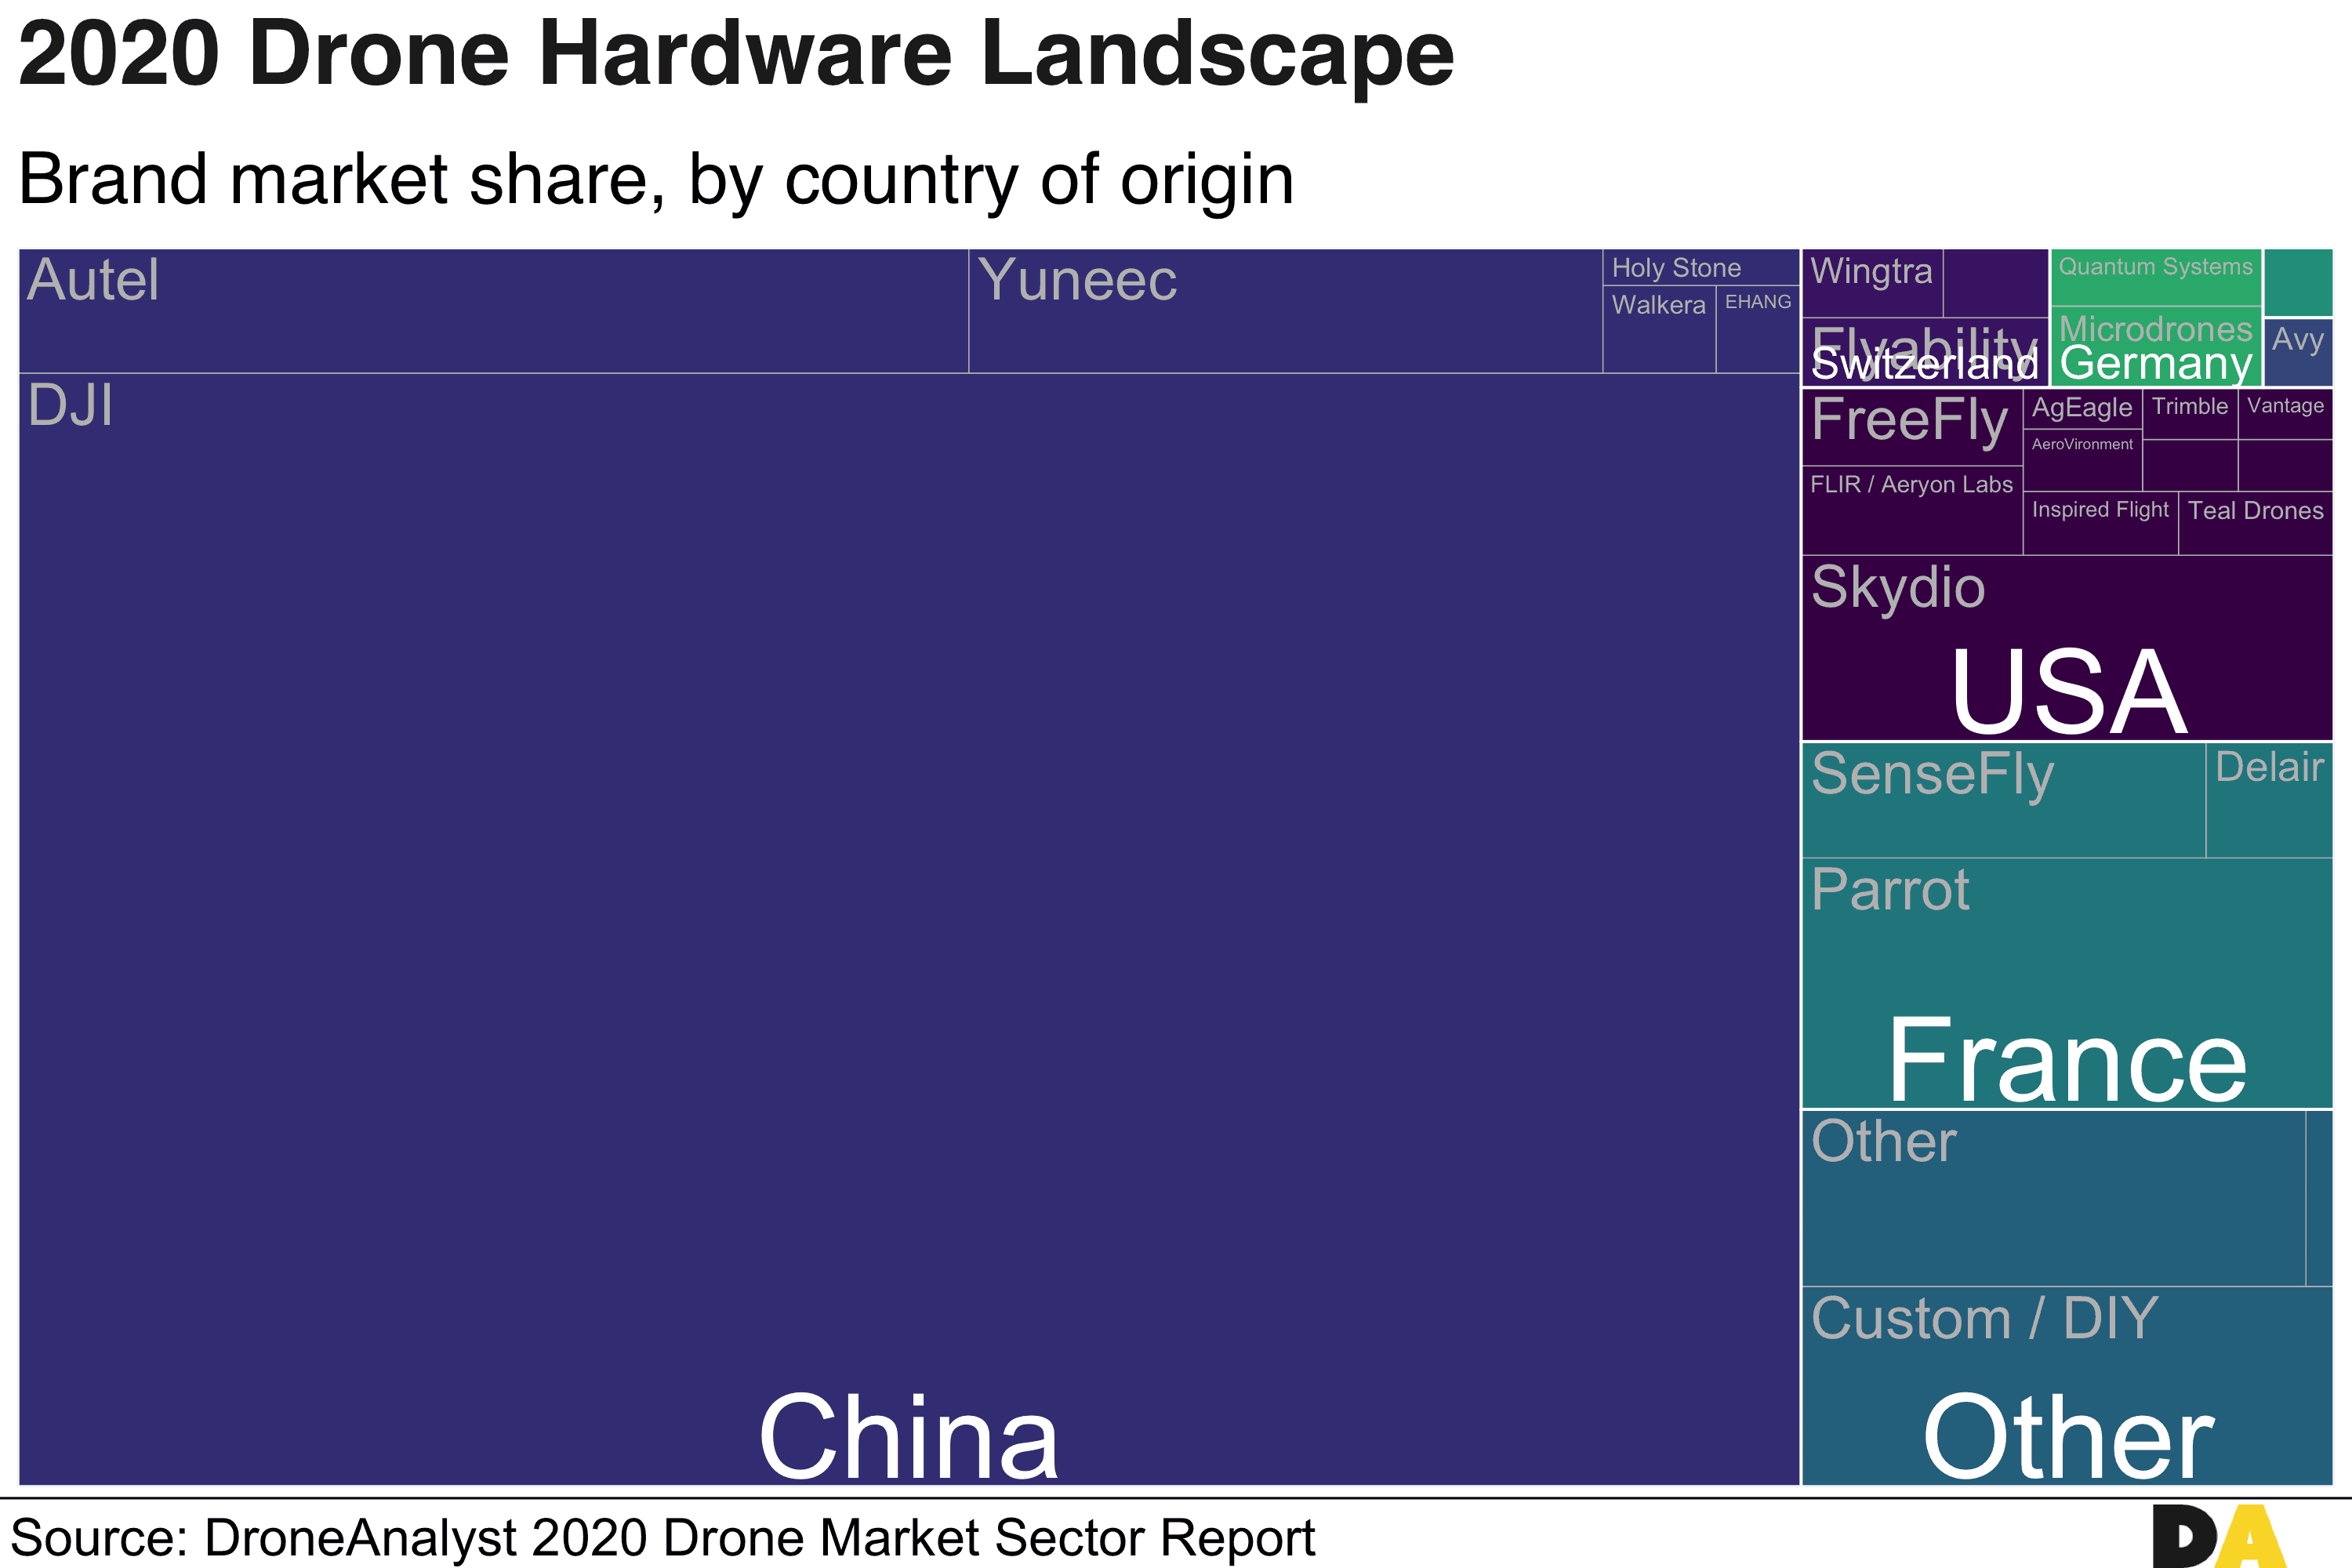 2020 Drone Hardware Landscape, mapping market share by country of origin.